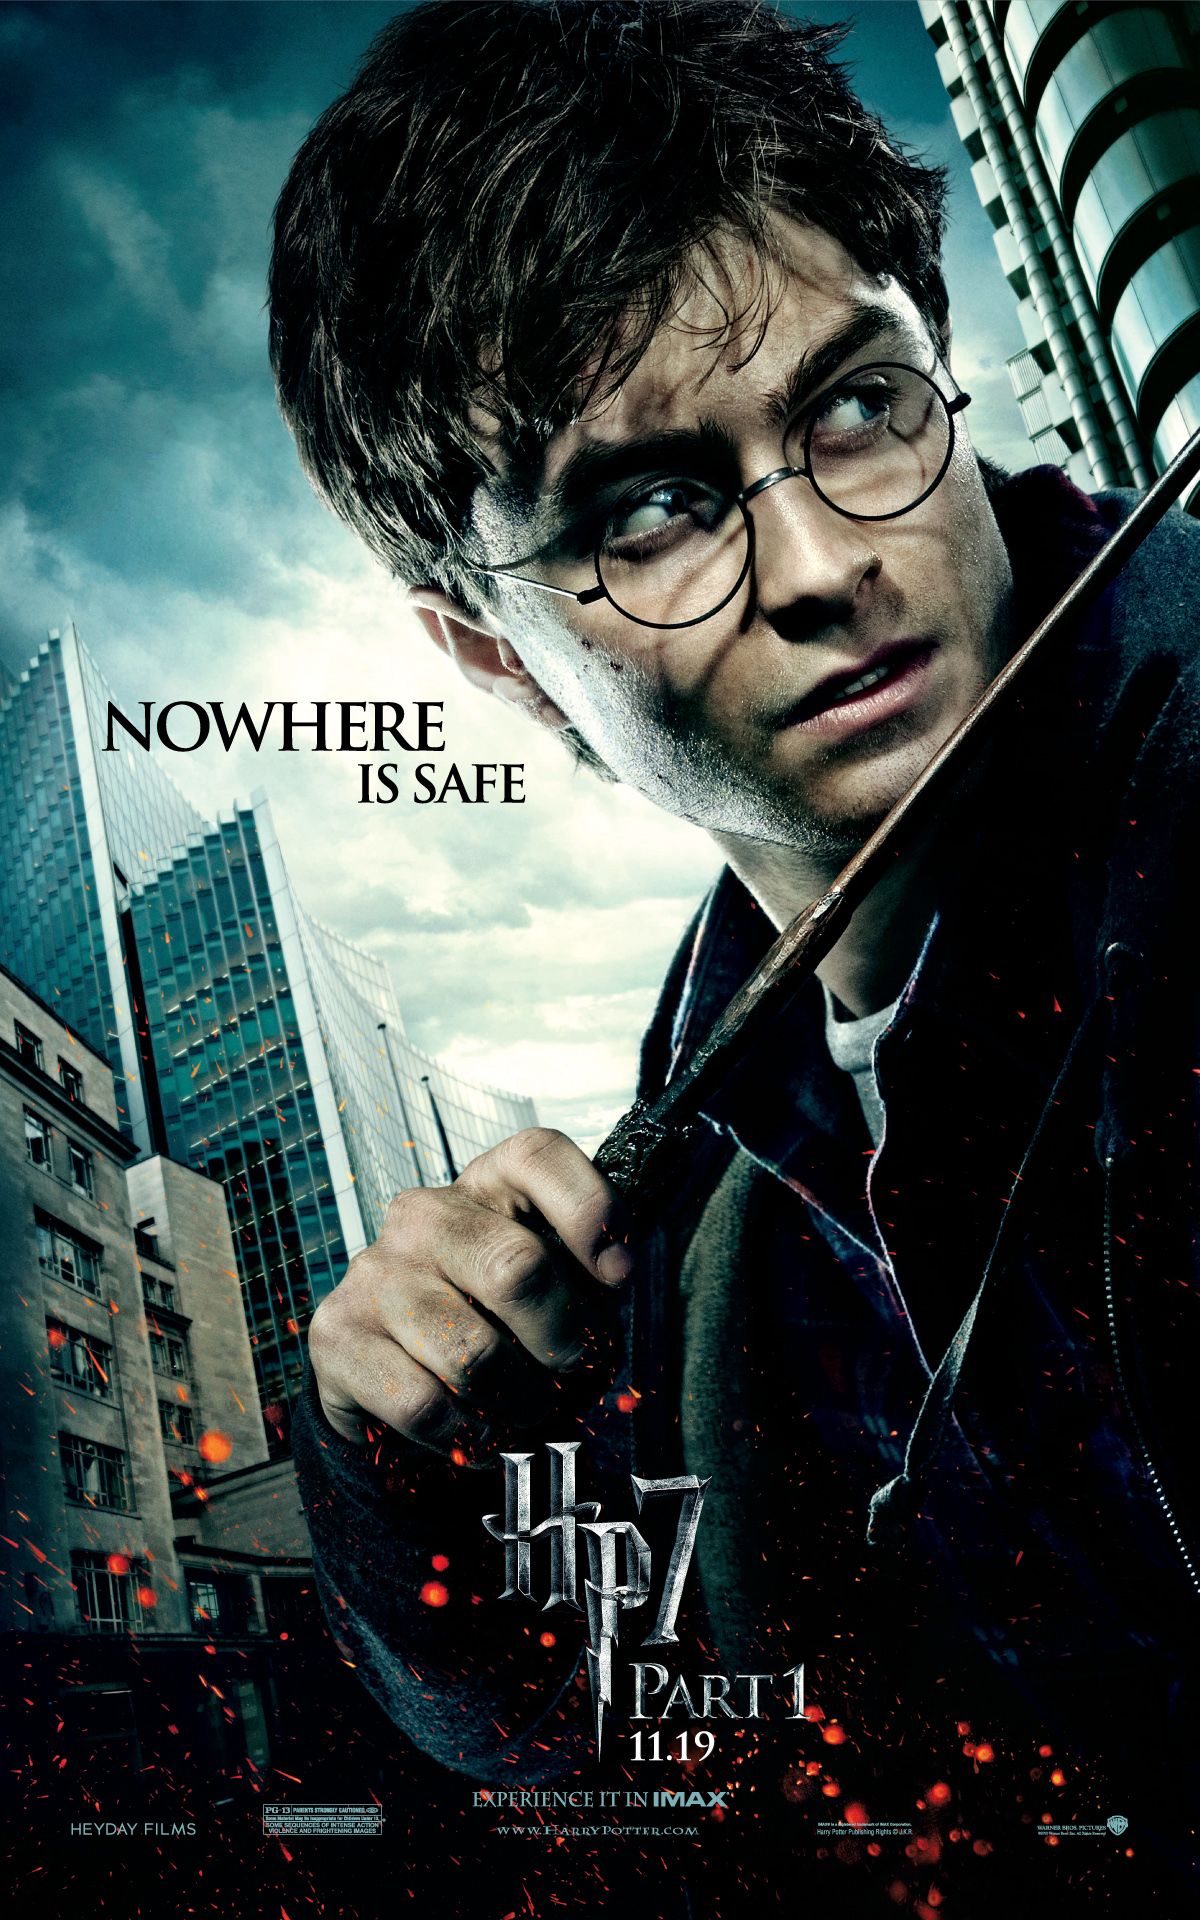 Harry Potter and the Deathly Hallows Character Poster #1